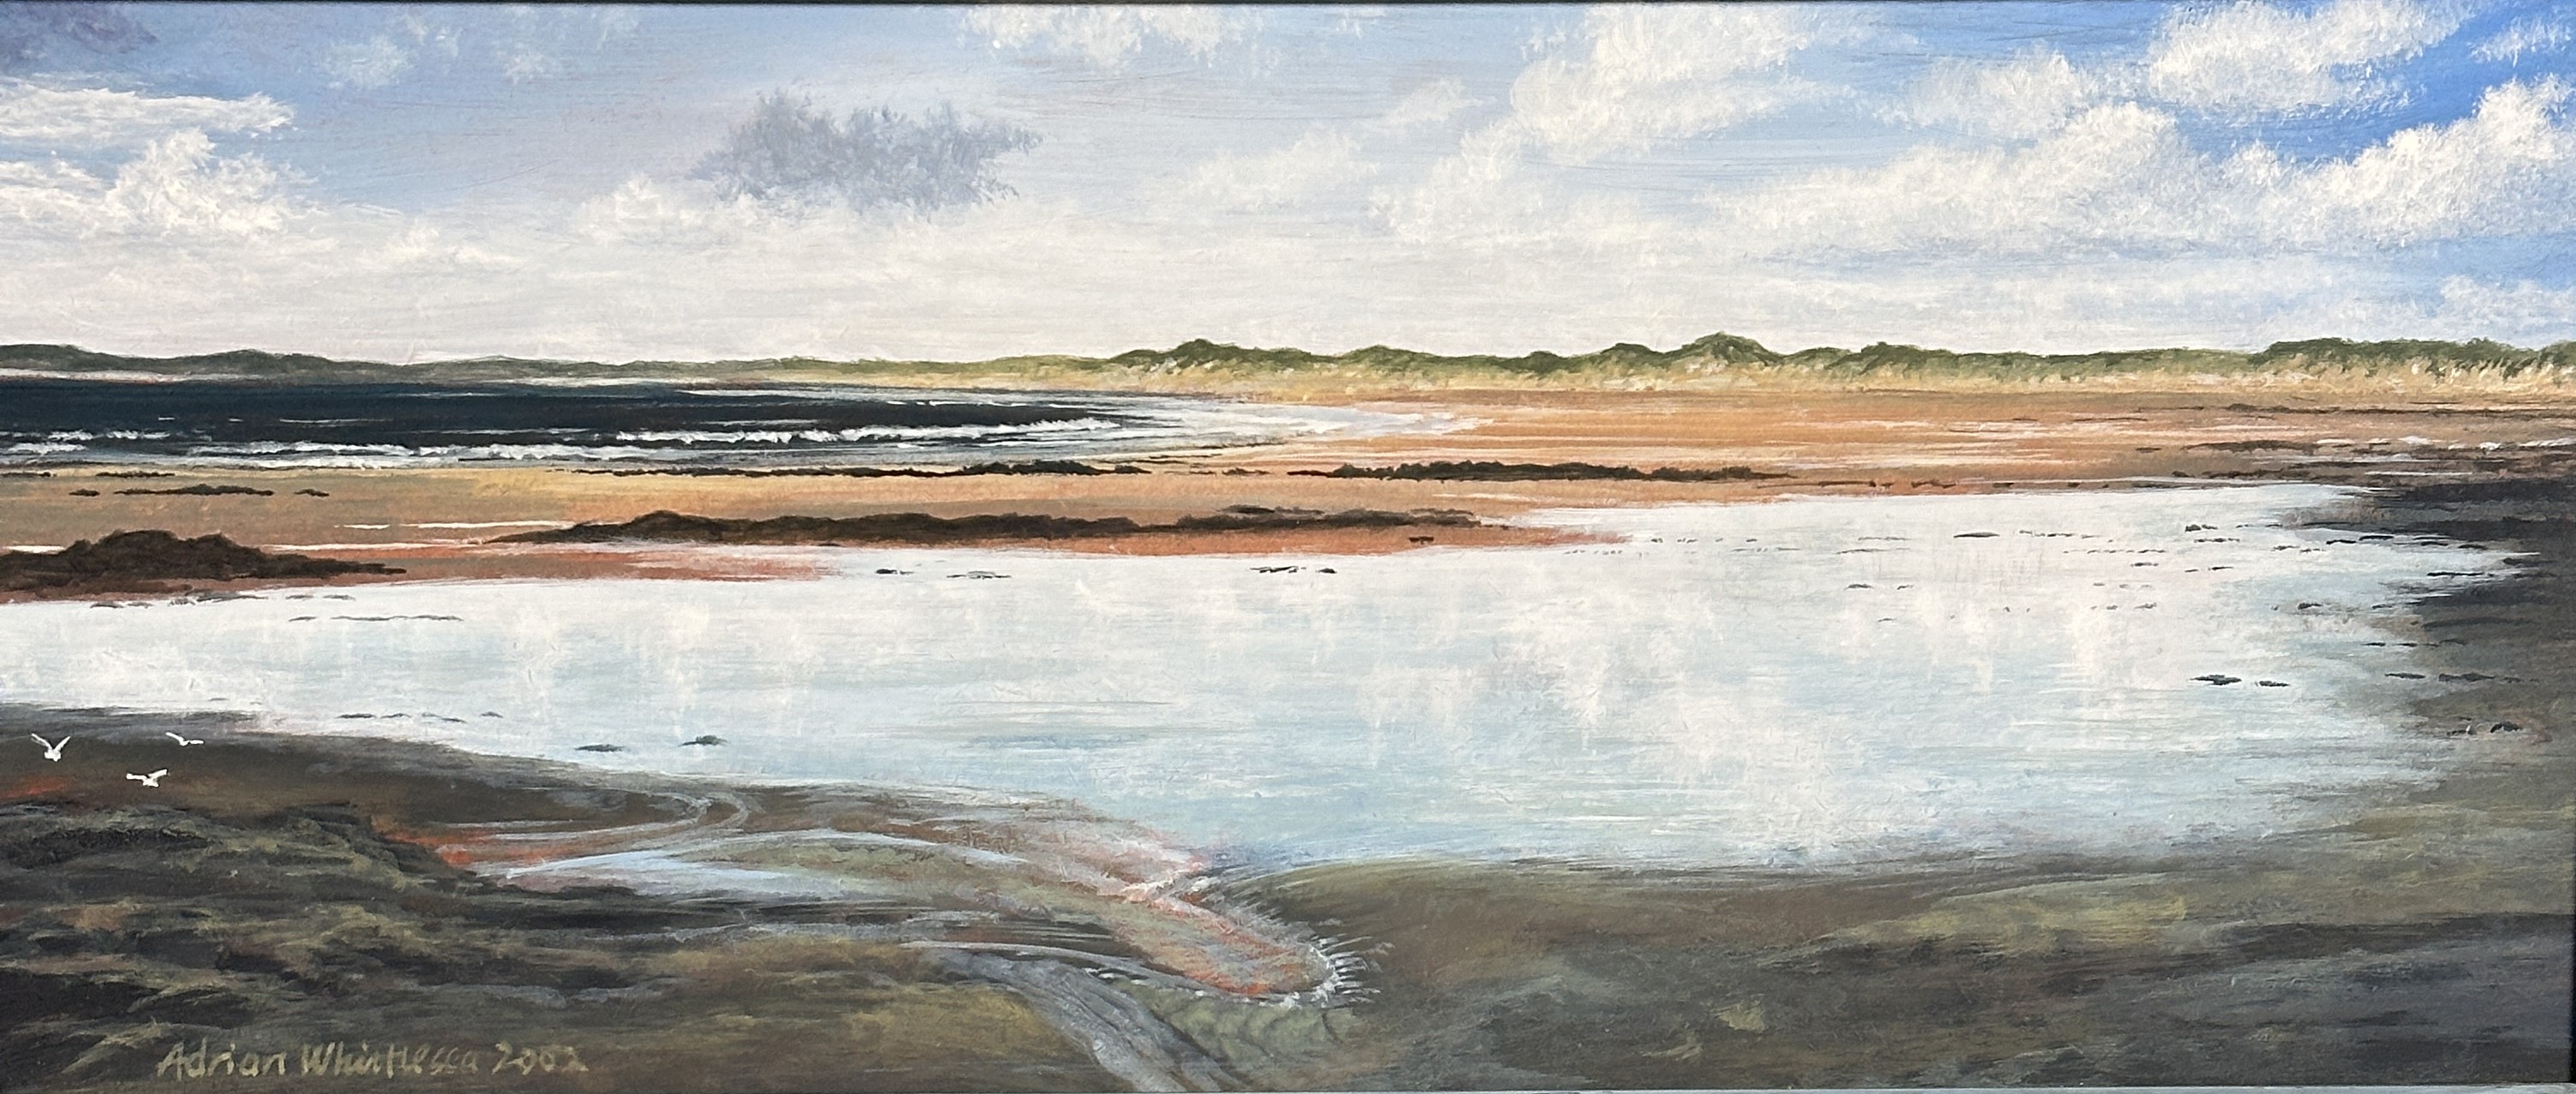 Adrian Whittlesea, British, Low tide, Coll Inner Hebrides, acrylic on wood, signed and dated 2002 in